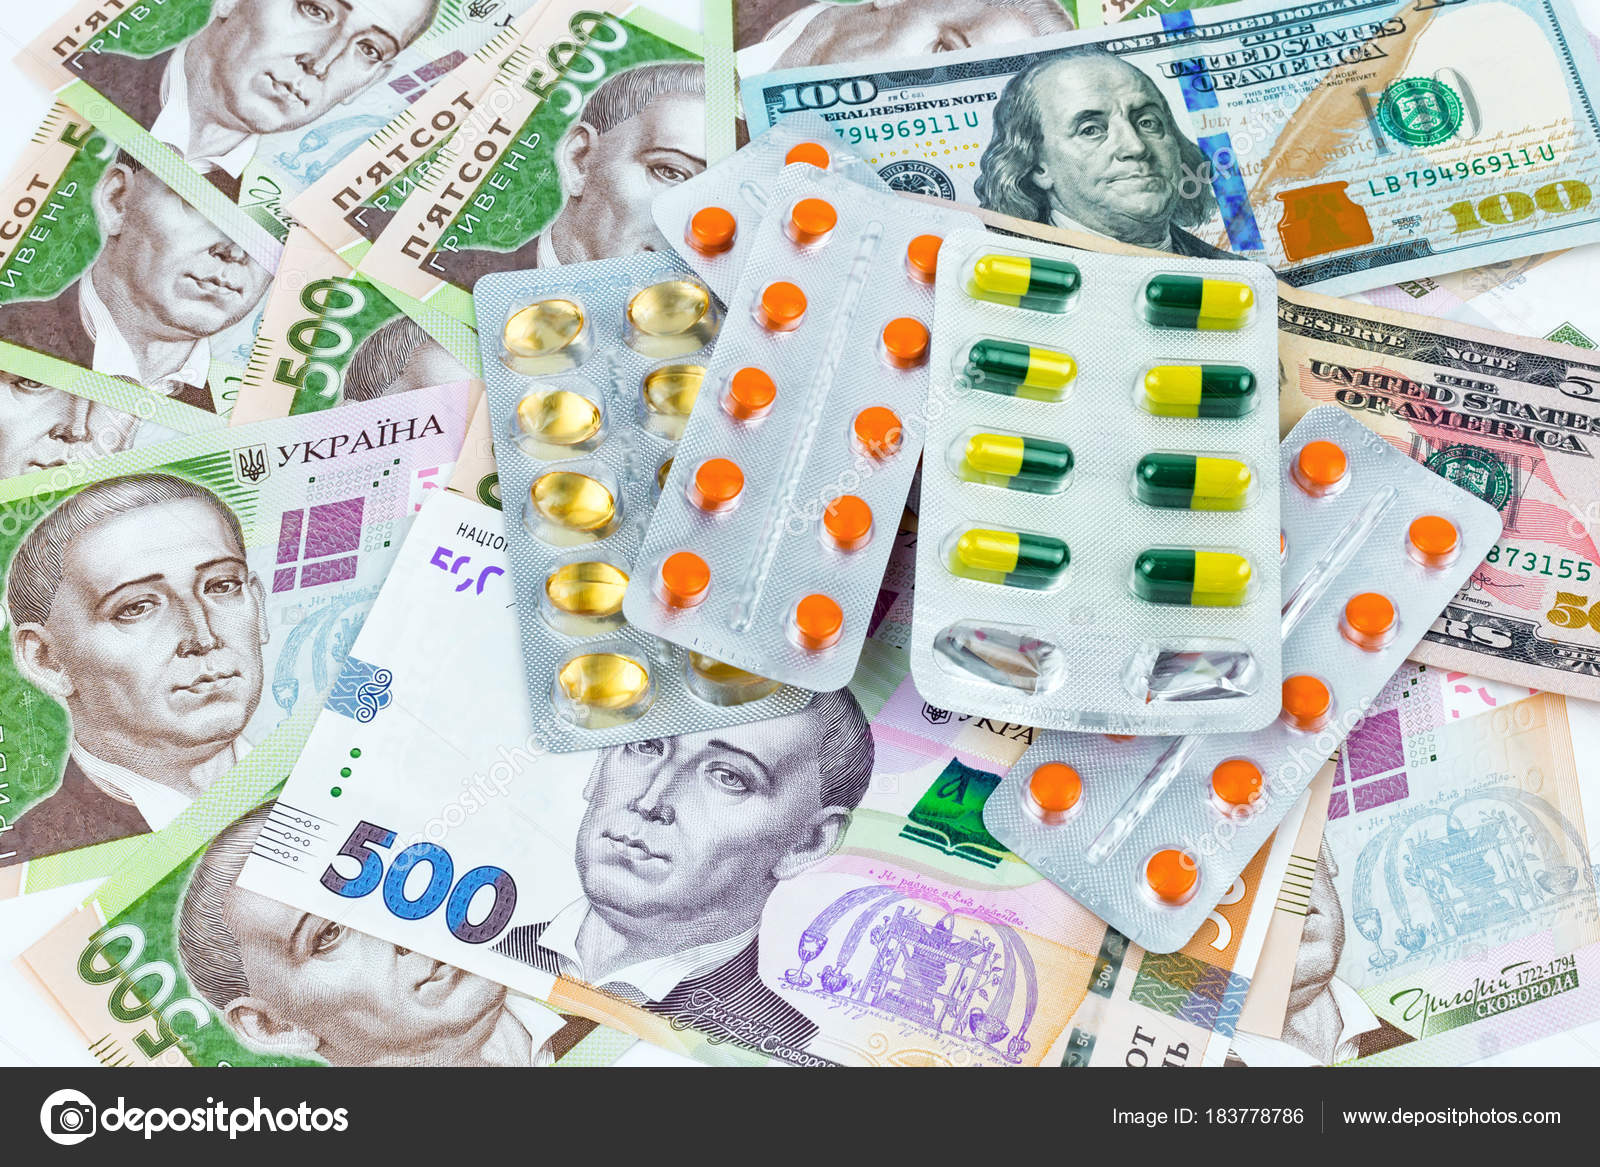 The principle of expensive medicine. Many pills lie on a white surface for money. There is no free medicine. Doctor Consultation and Corruption. Ukrainian hryvnia and dollar and pills 2018